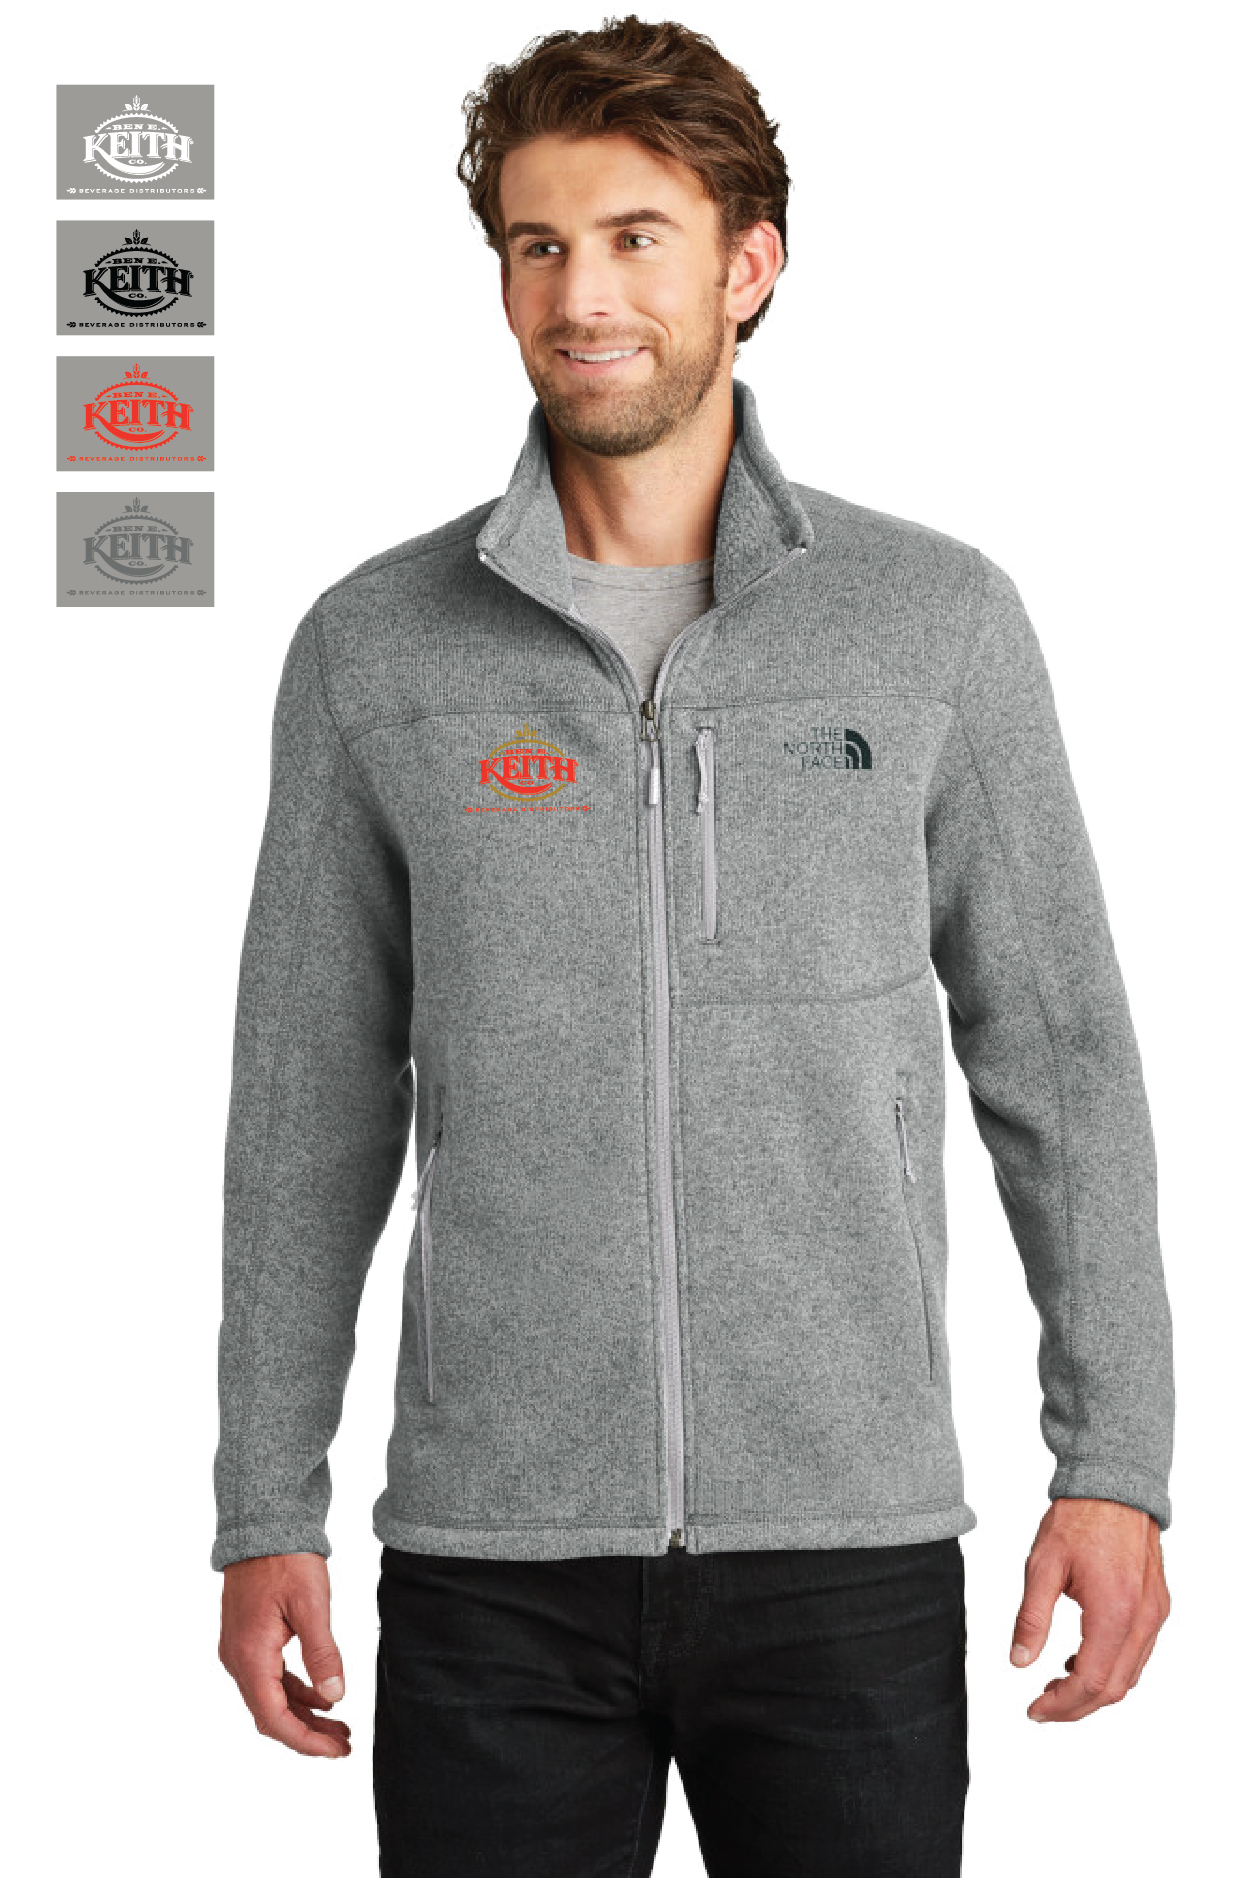 The North Face® Sweater Fleece Jacket – Ben E Keith Beverage Store